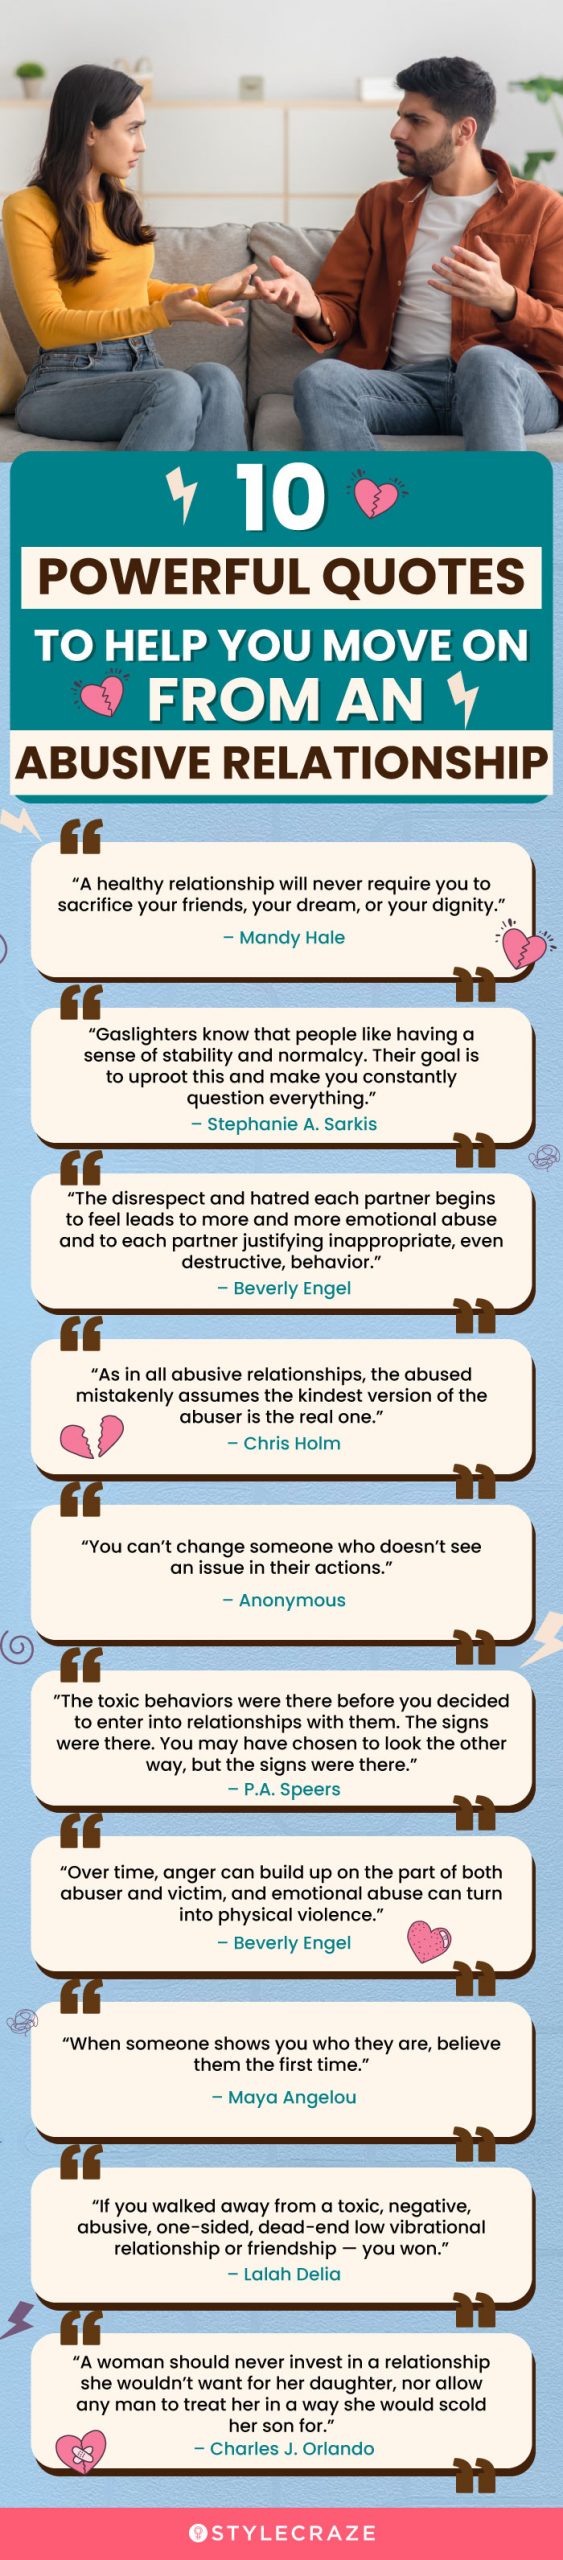 10 powerful quotes to help you move on from an abusive relationship (infographic)